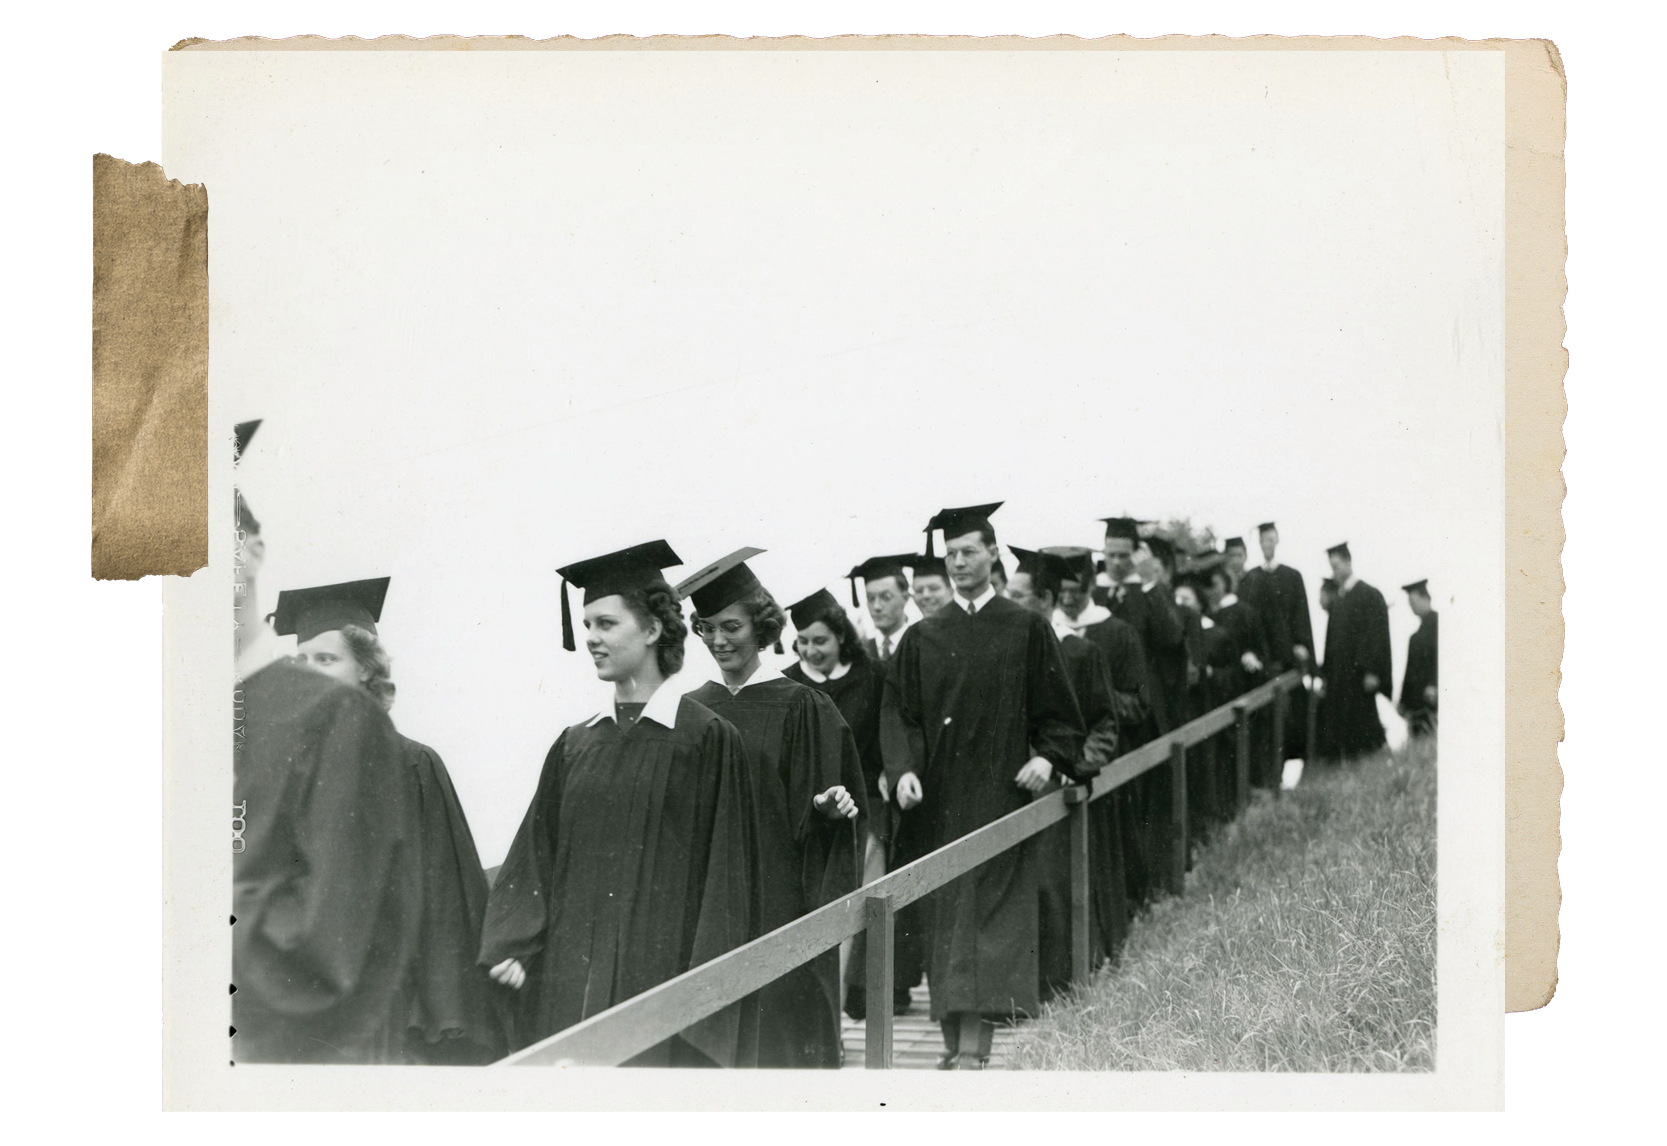 A black and white photograph of students in caps and gowns, likely attending the first commencement held on the Westwood campus on June 14, 1941.